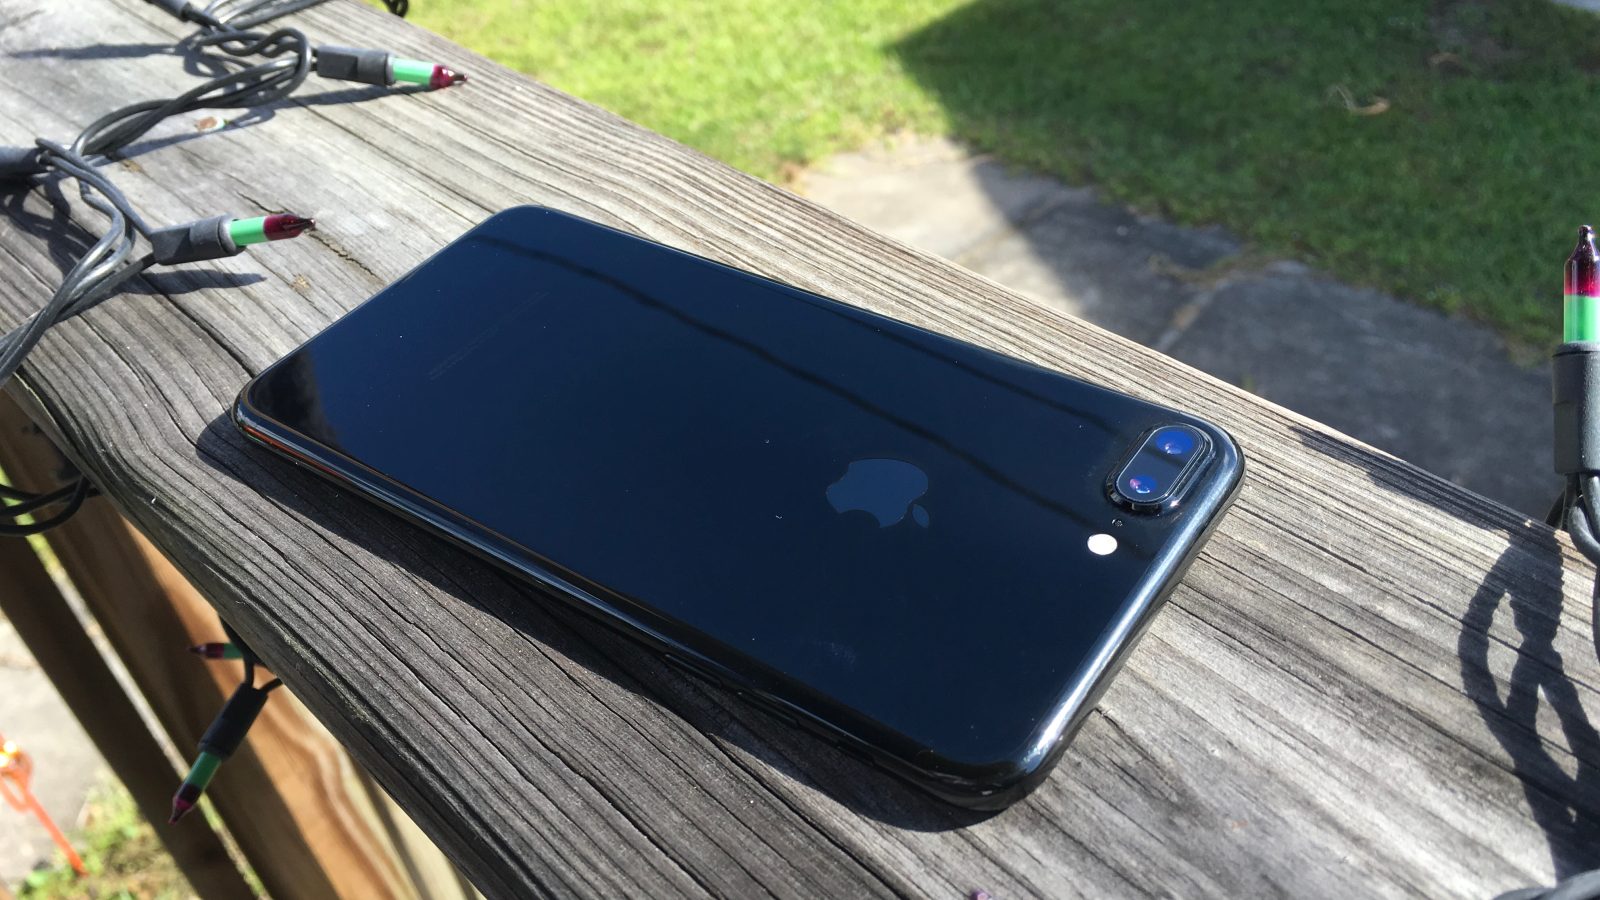 Here S How The Jet Black Iphone 7 Finish Holds Up Without A Case